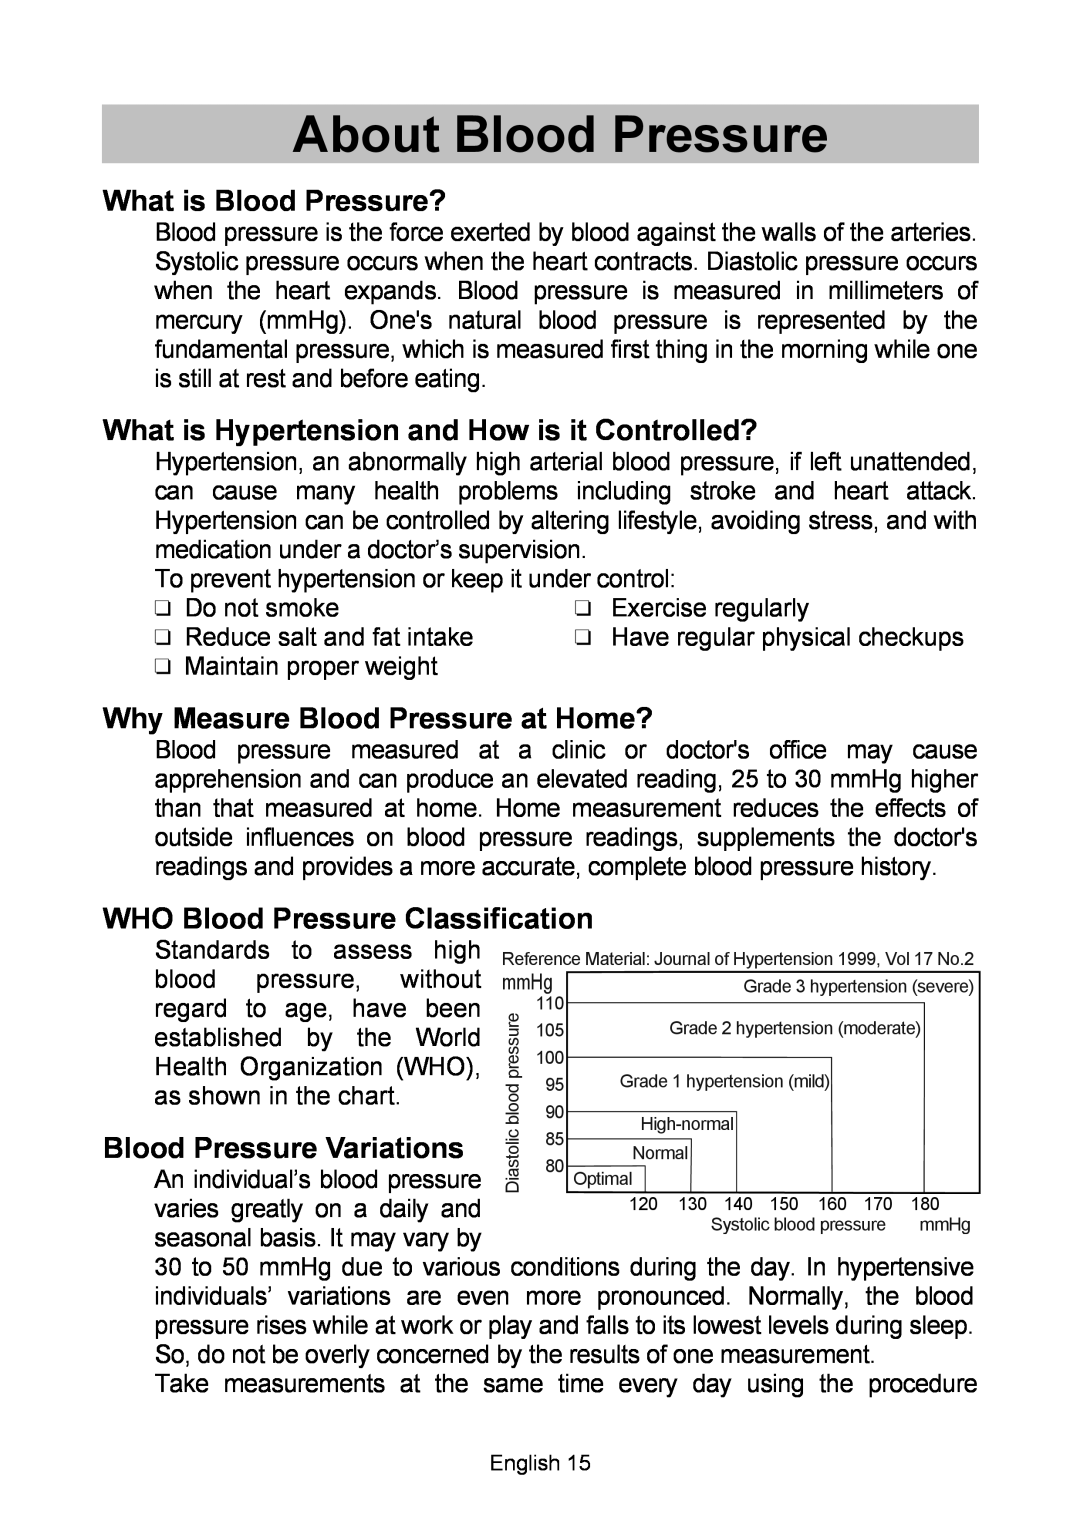 A&D BT-Ci, UA-767 About Blood Pressure, What is Blood Pressure?, What is Hypertension and How is it Controlled? 